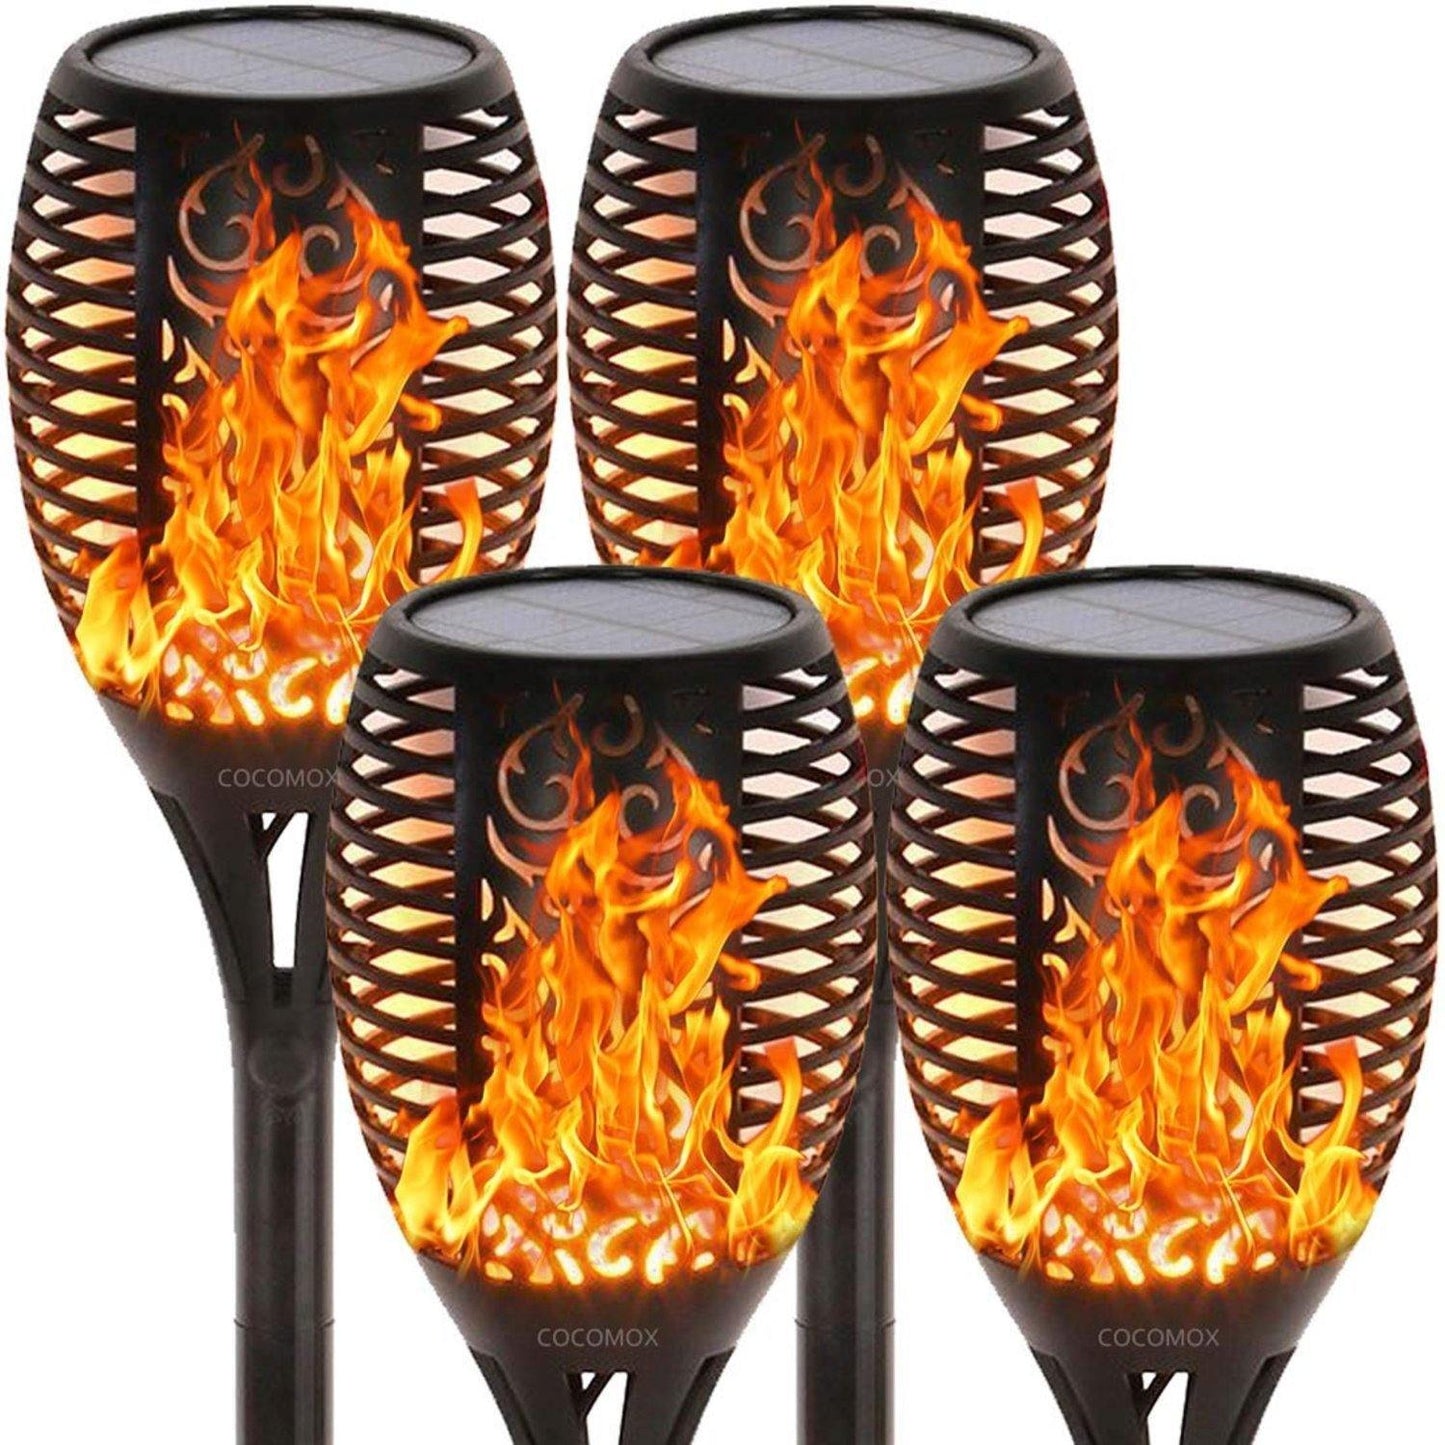 Solar Flame Flickering torch Lights For Sale